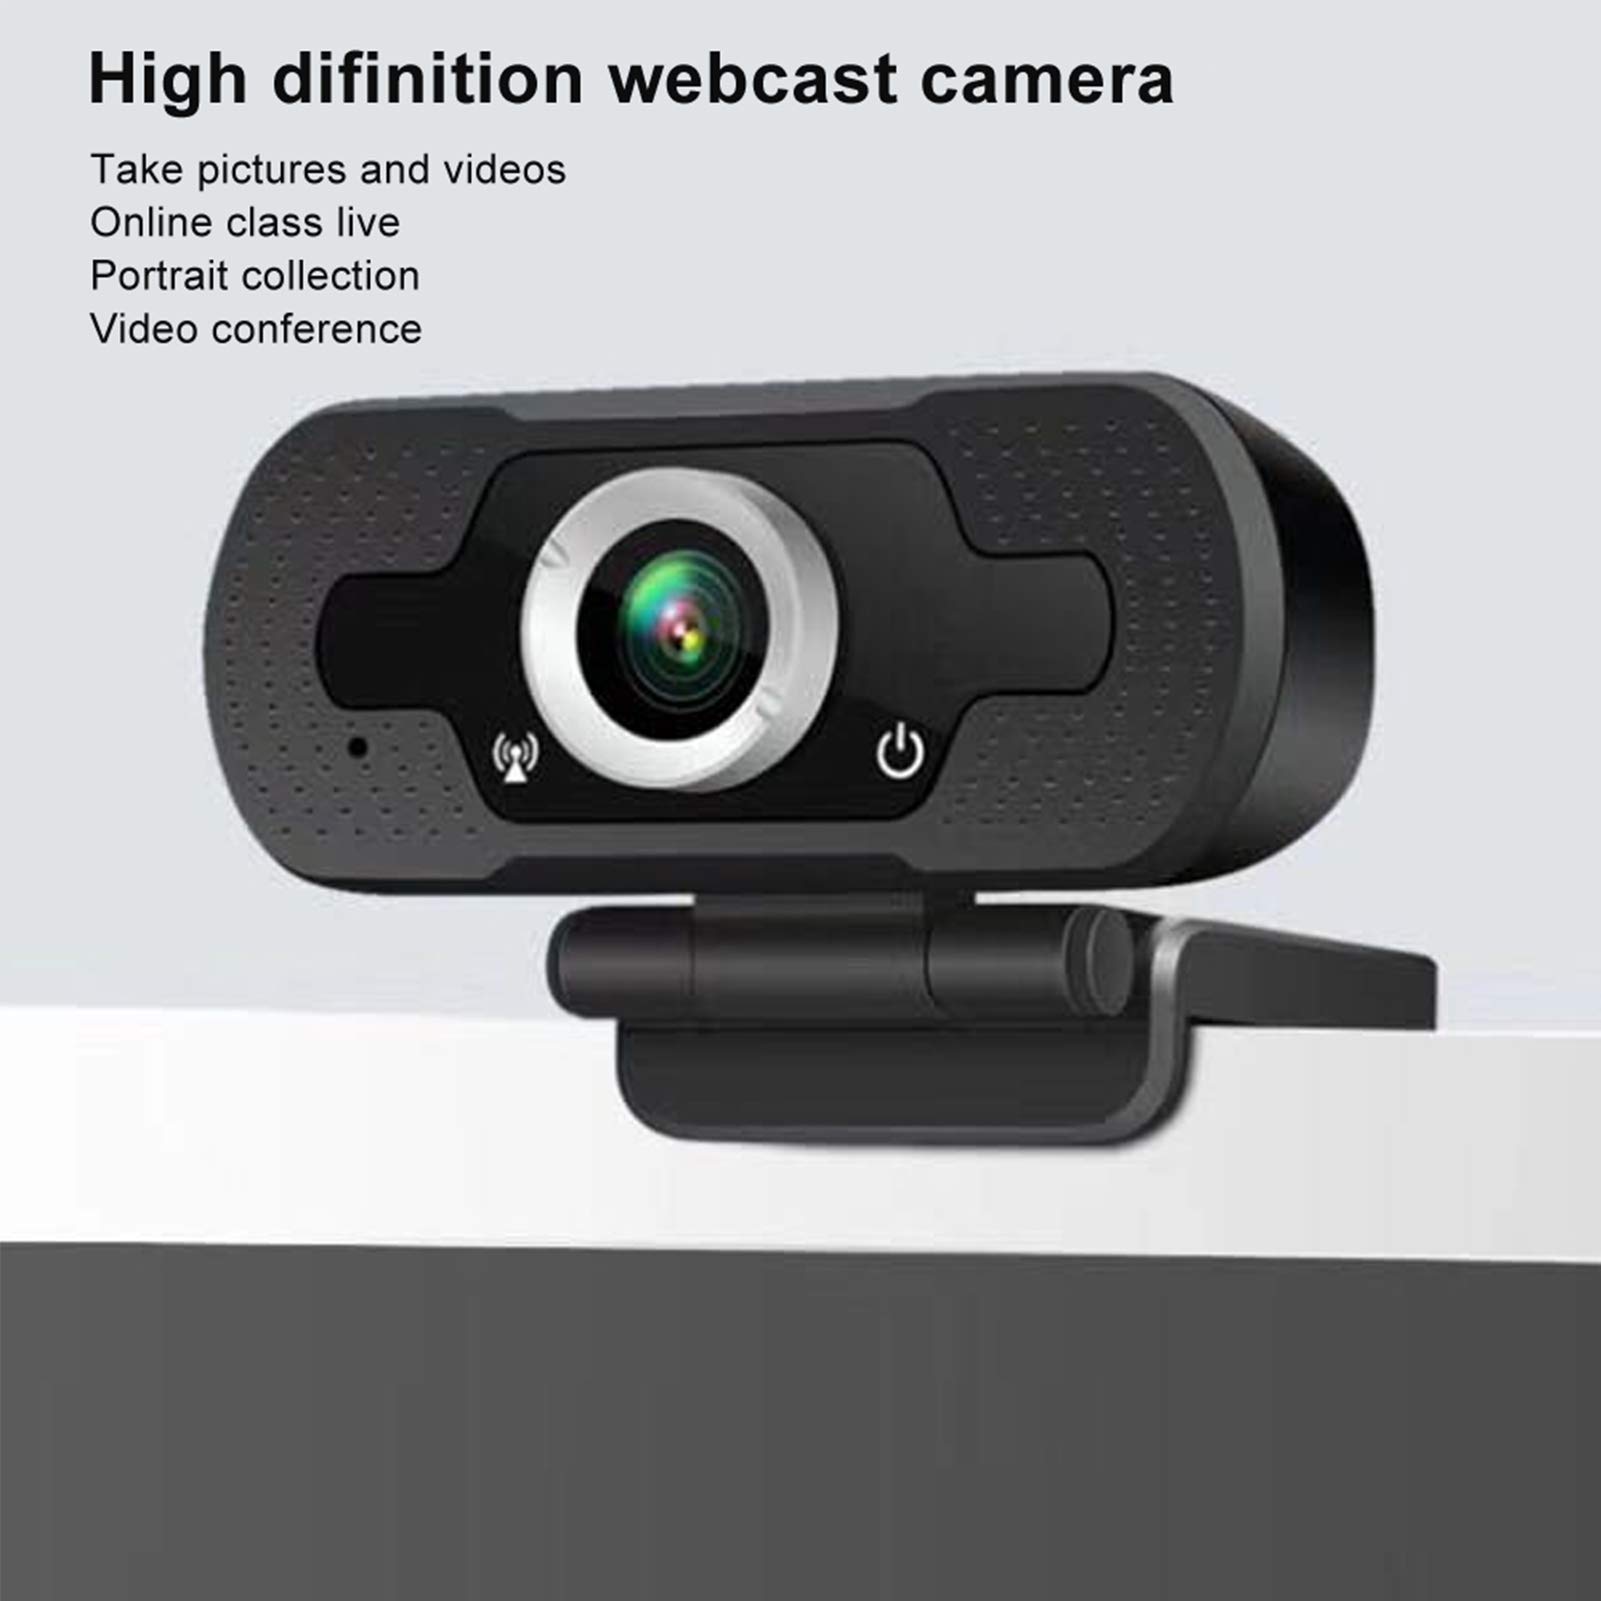 Zyyini Bindpo Web Camera, 1080P High Definition Computer Camera Video Conference USB 2.0 PC Camera, Wide Angle Lens, for Recording, Calling, Gaming